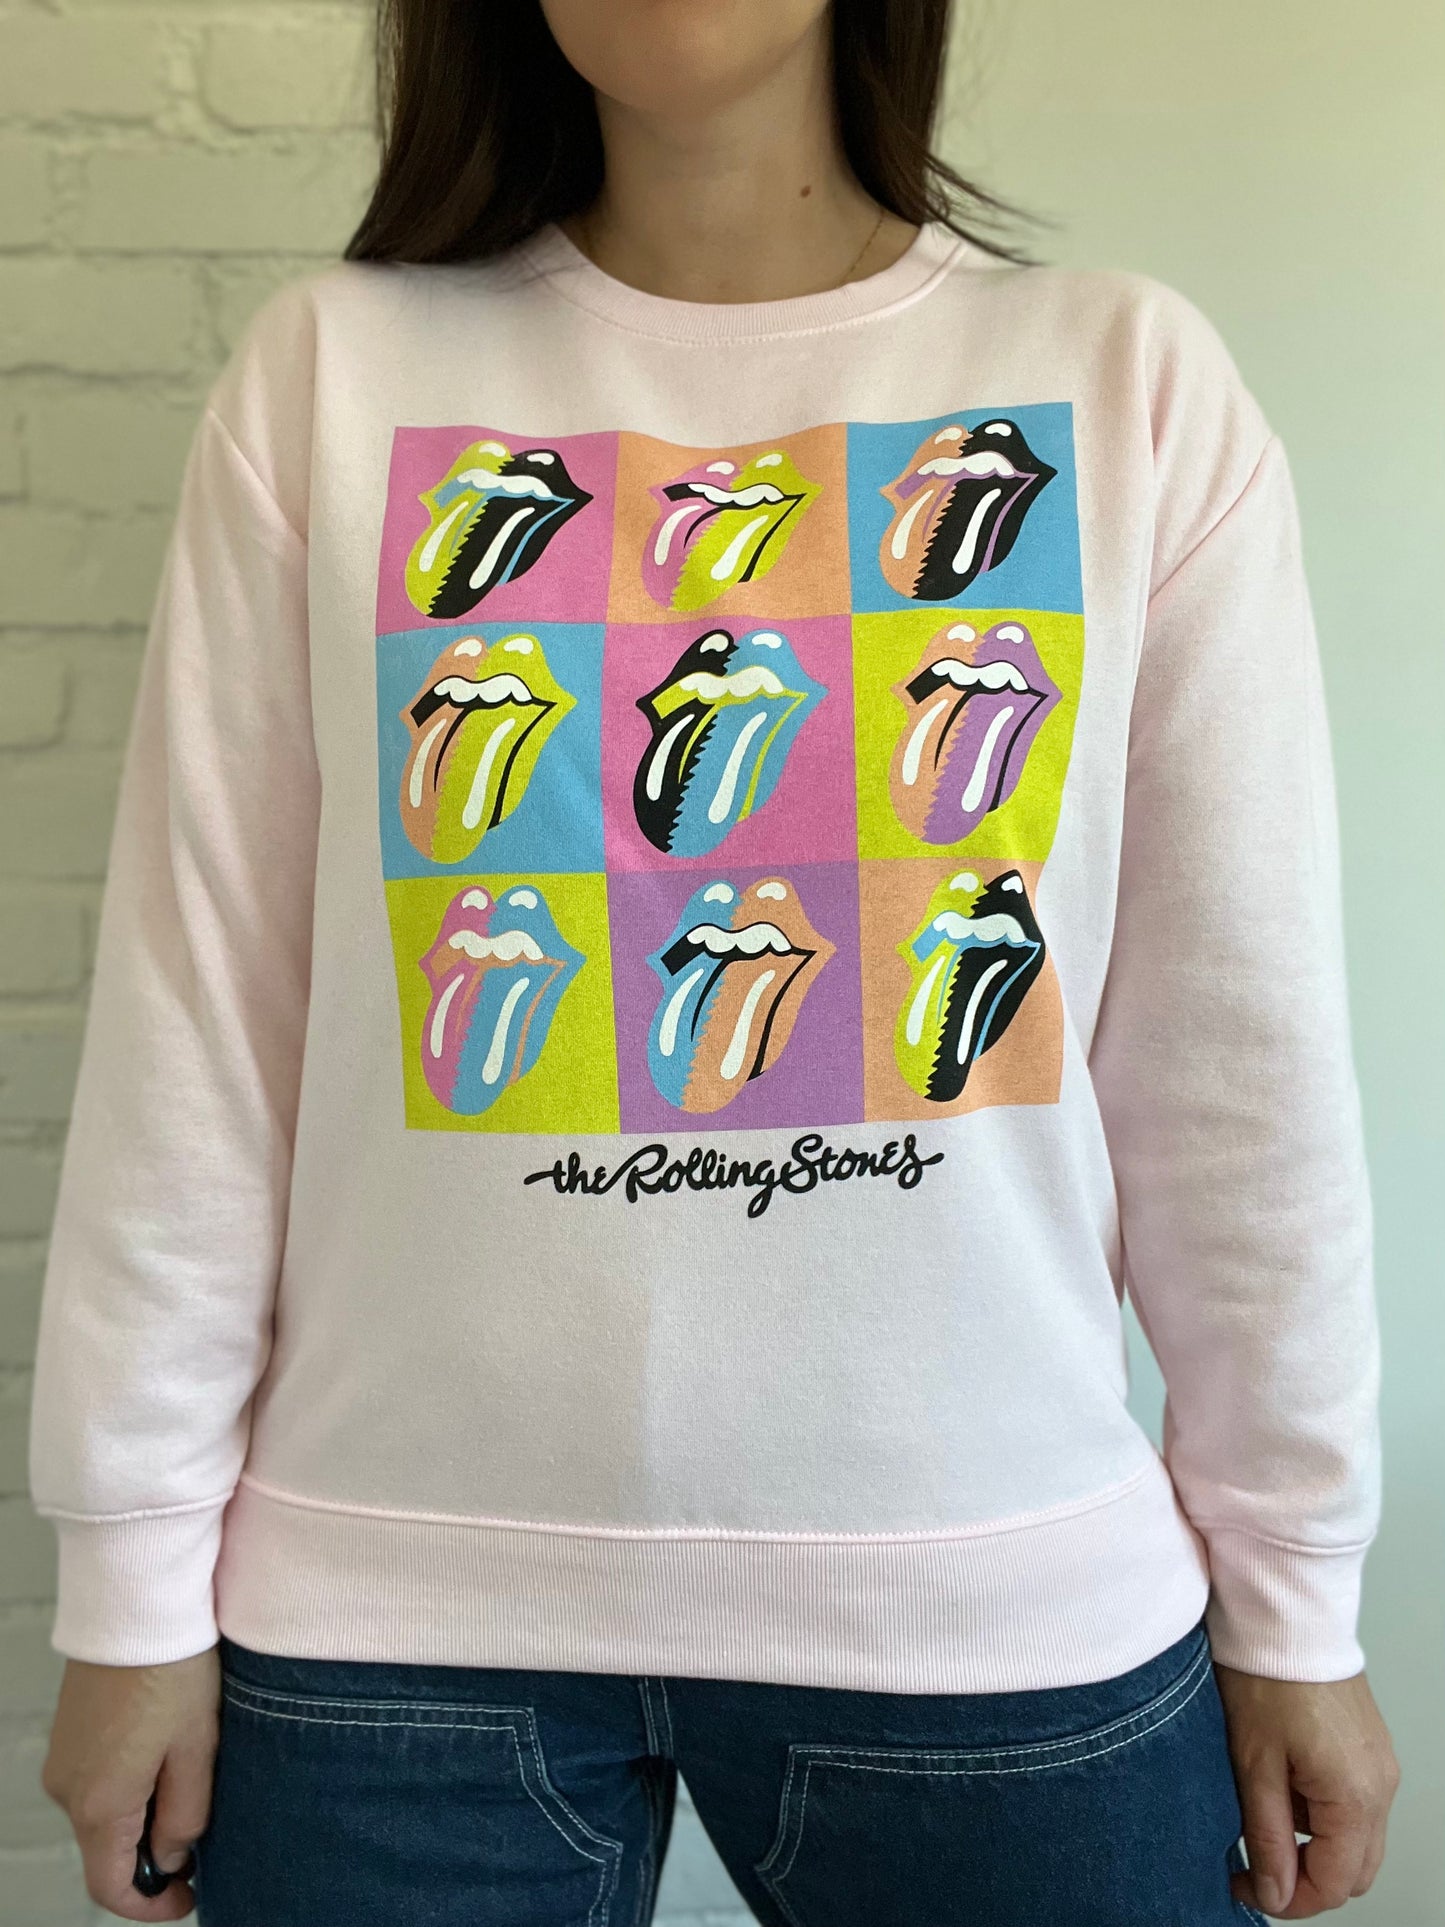 Rolling Stones x Andy Warhol Sweater - Size M